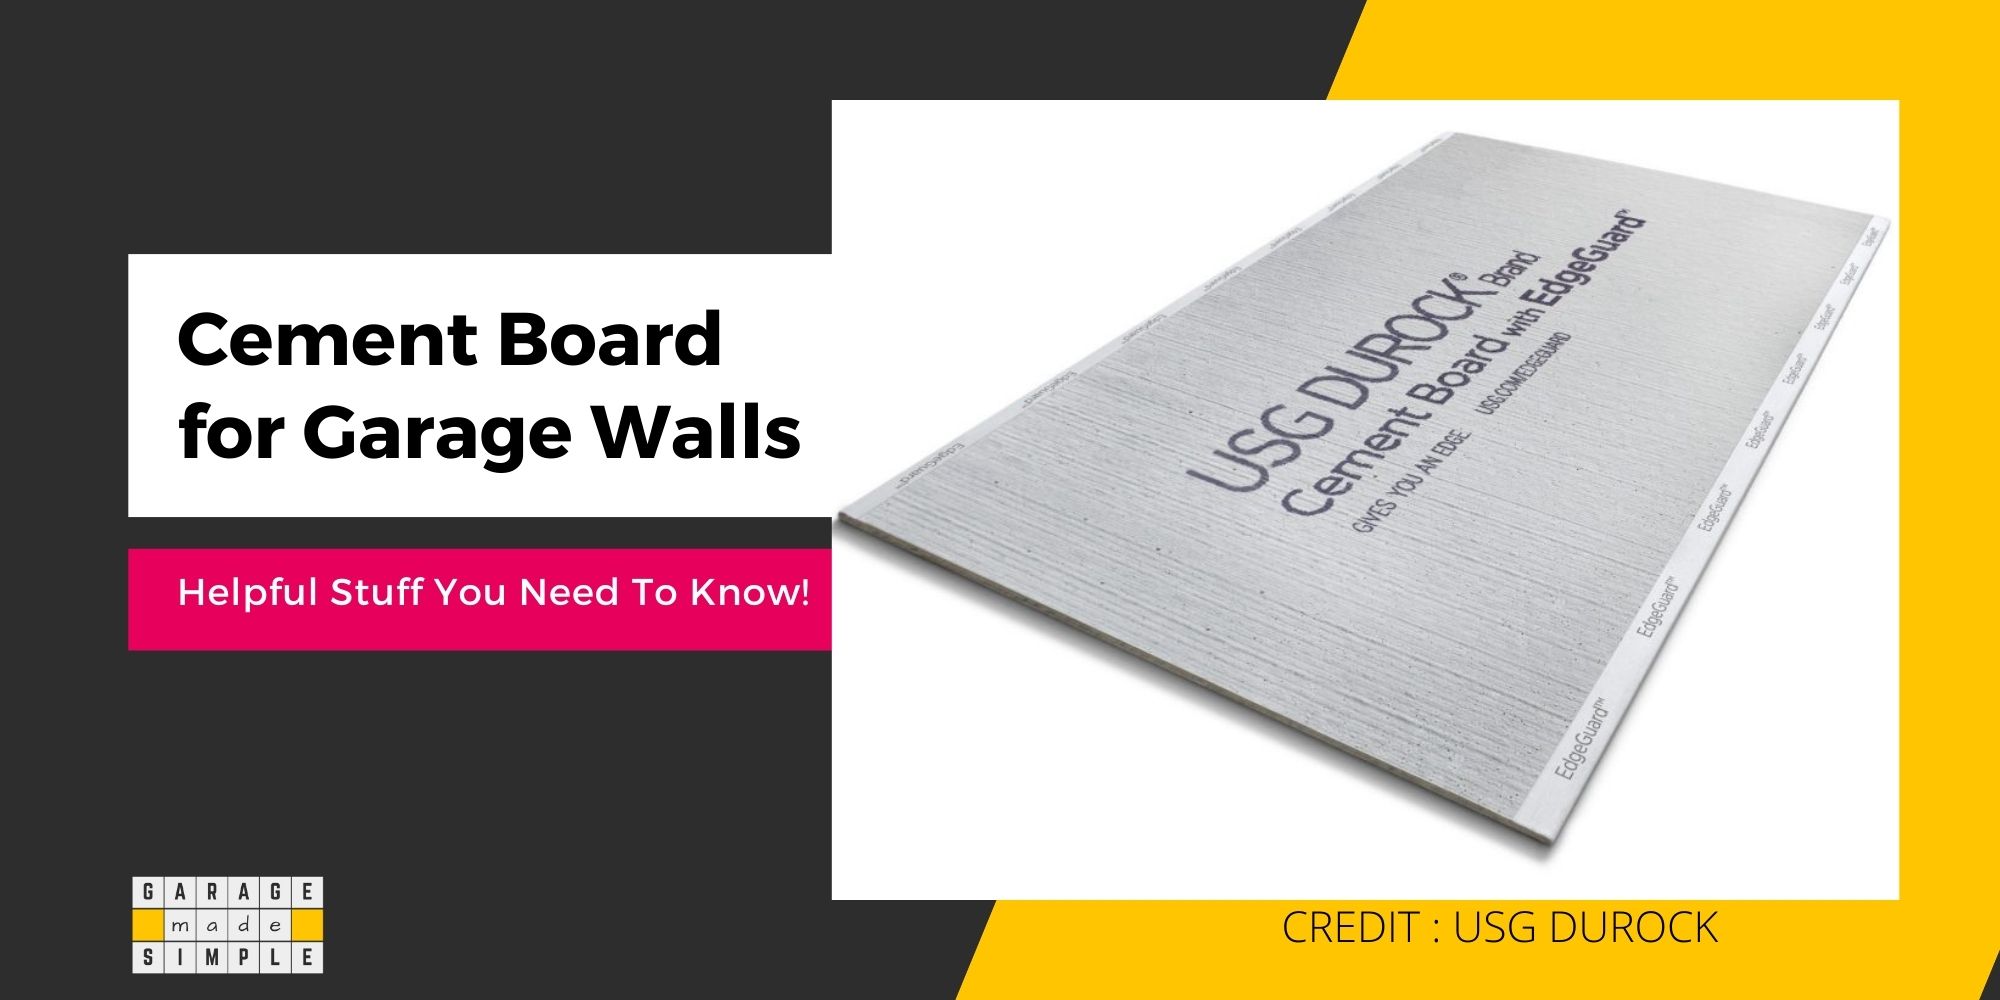 Cement Board For Garage Walls: (6 Outstanding Features!)